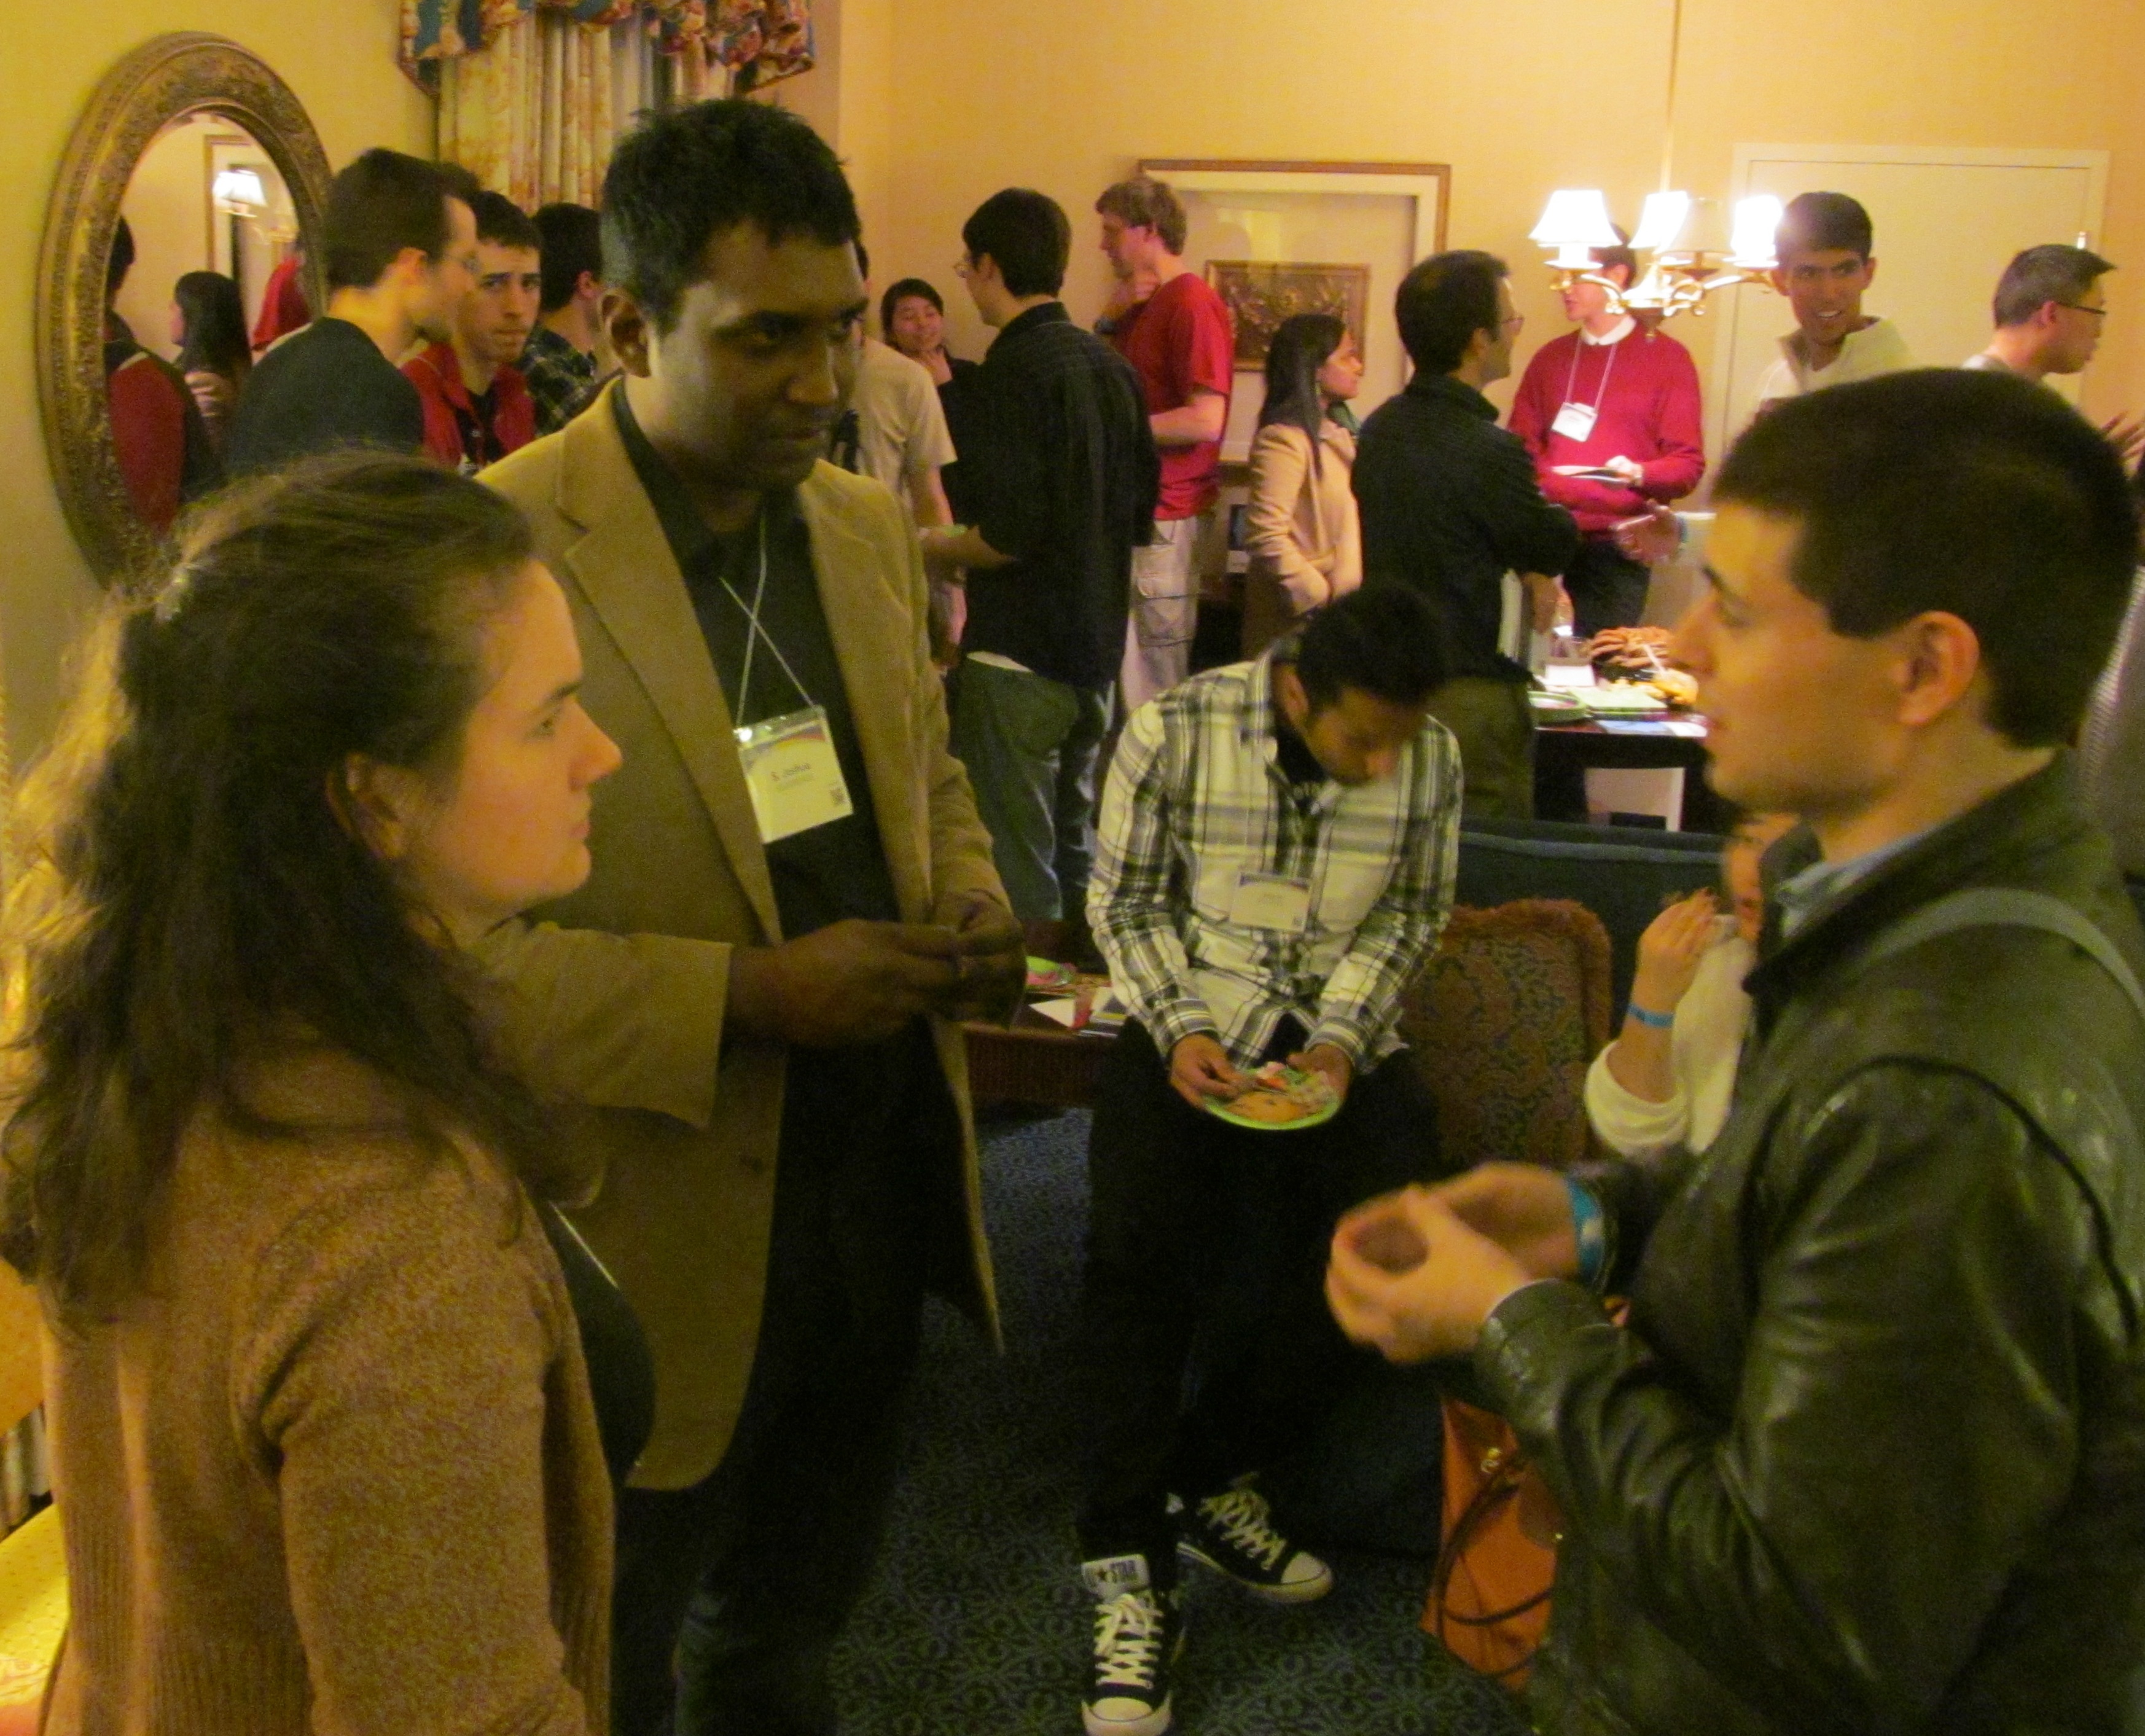 S. Joshua Swamidass connects with Emerging Scholars, including J. Nathan Matias at ESN's Urbana12 Recpetion.